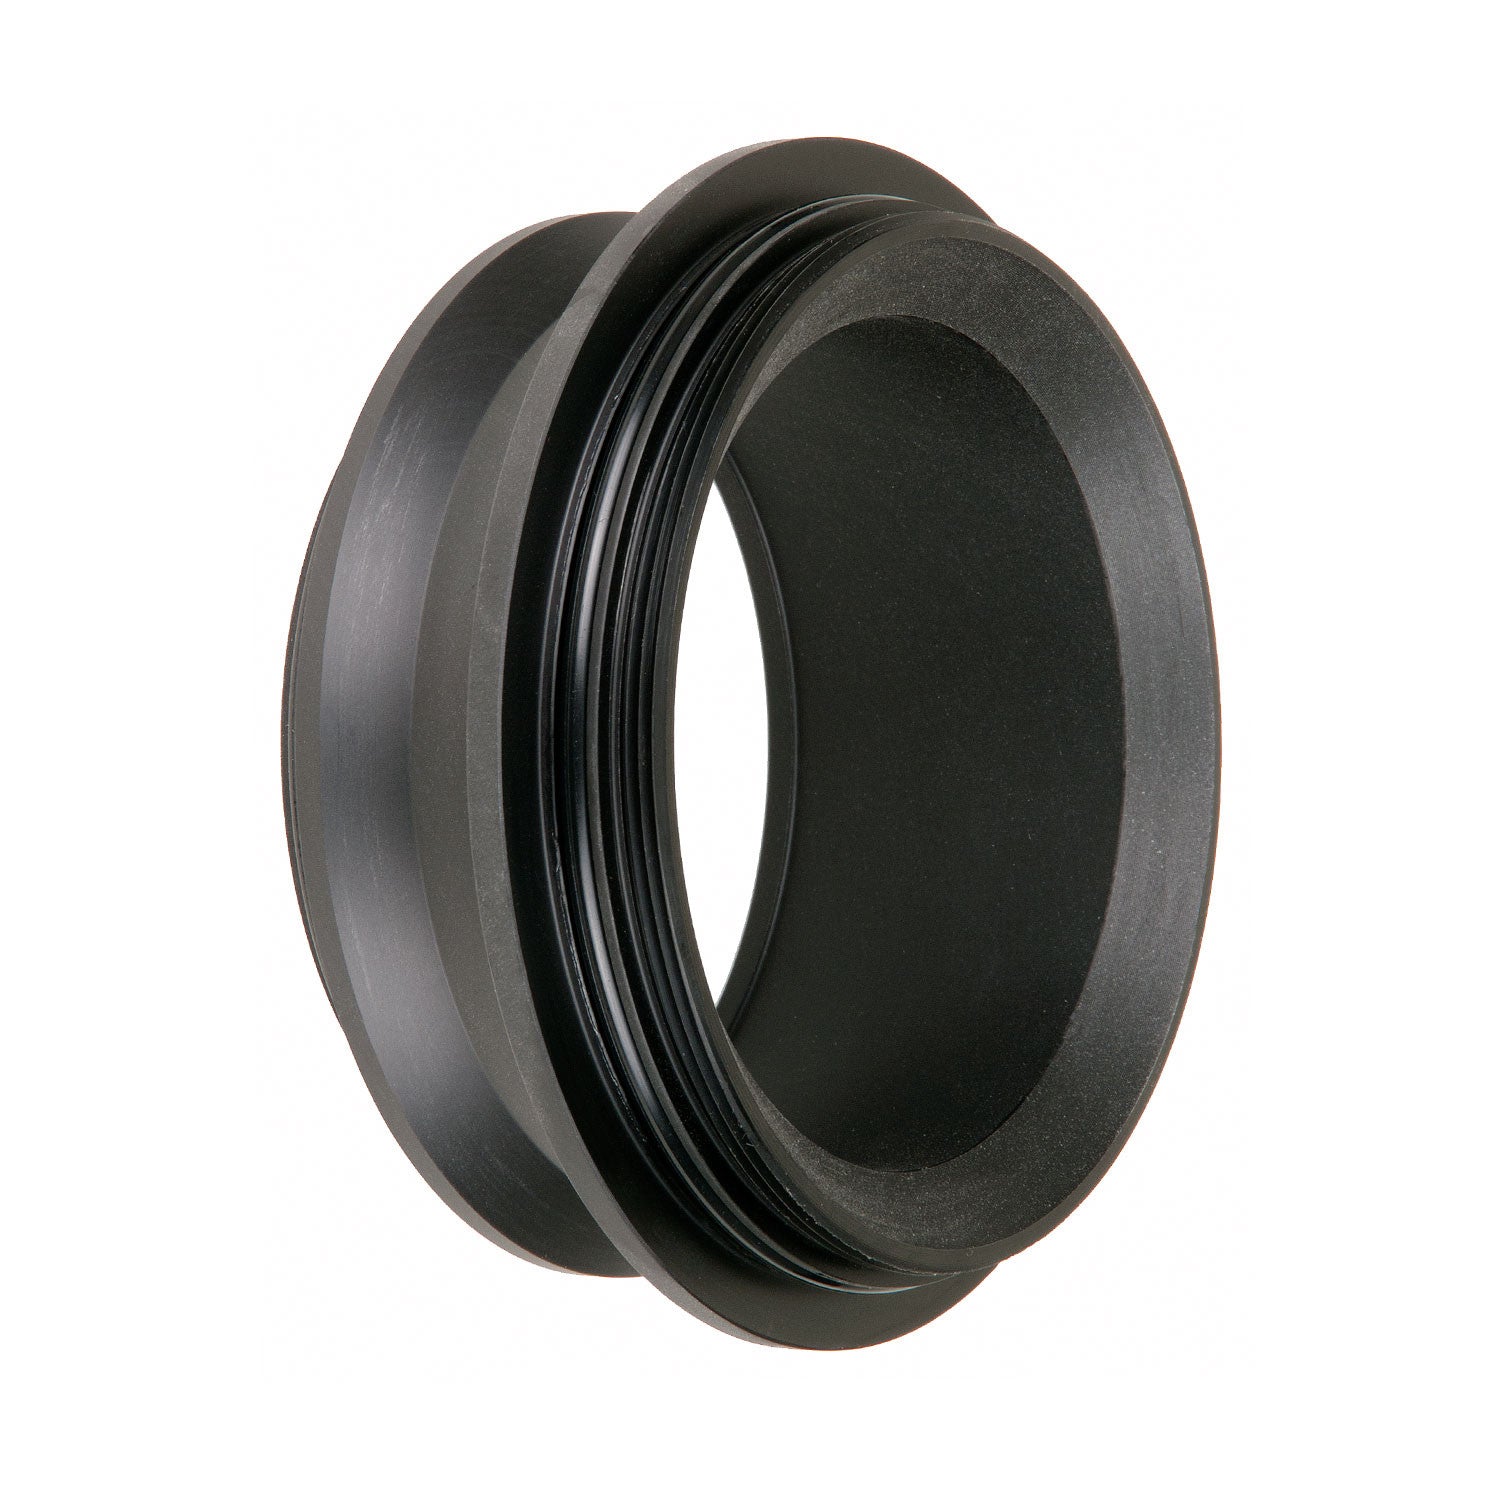 FL Extension for Lenses Up To 3.5 Inches